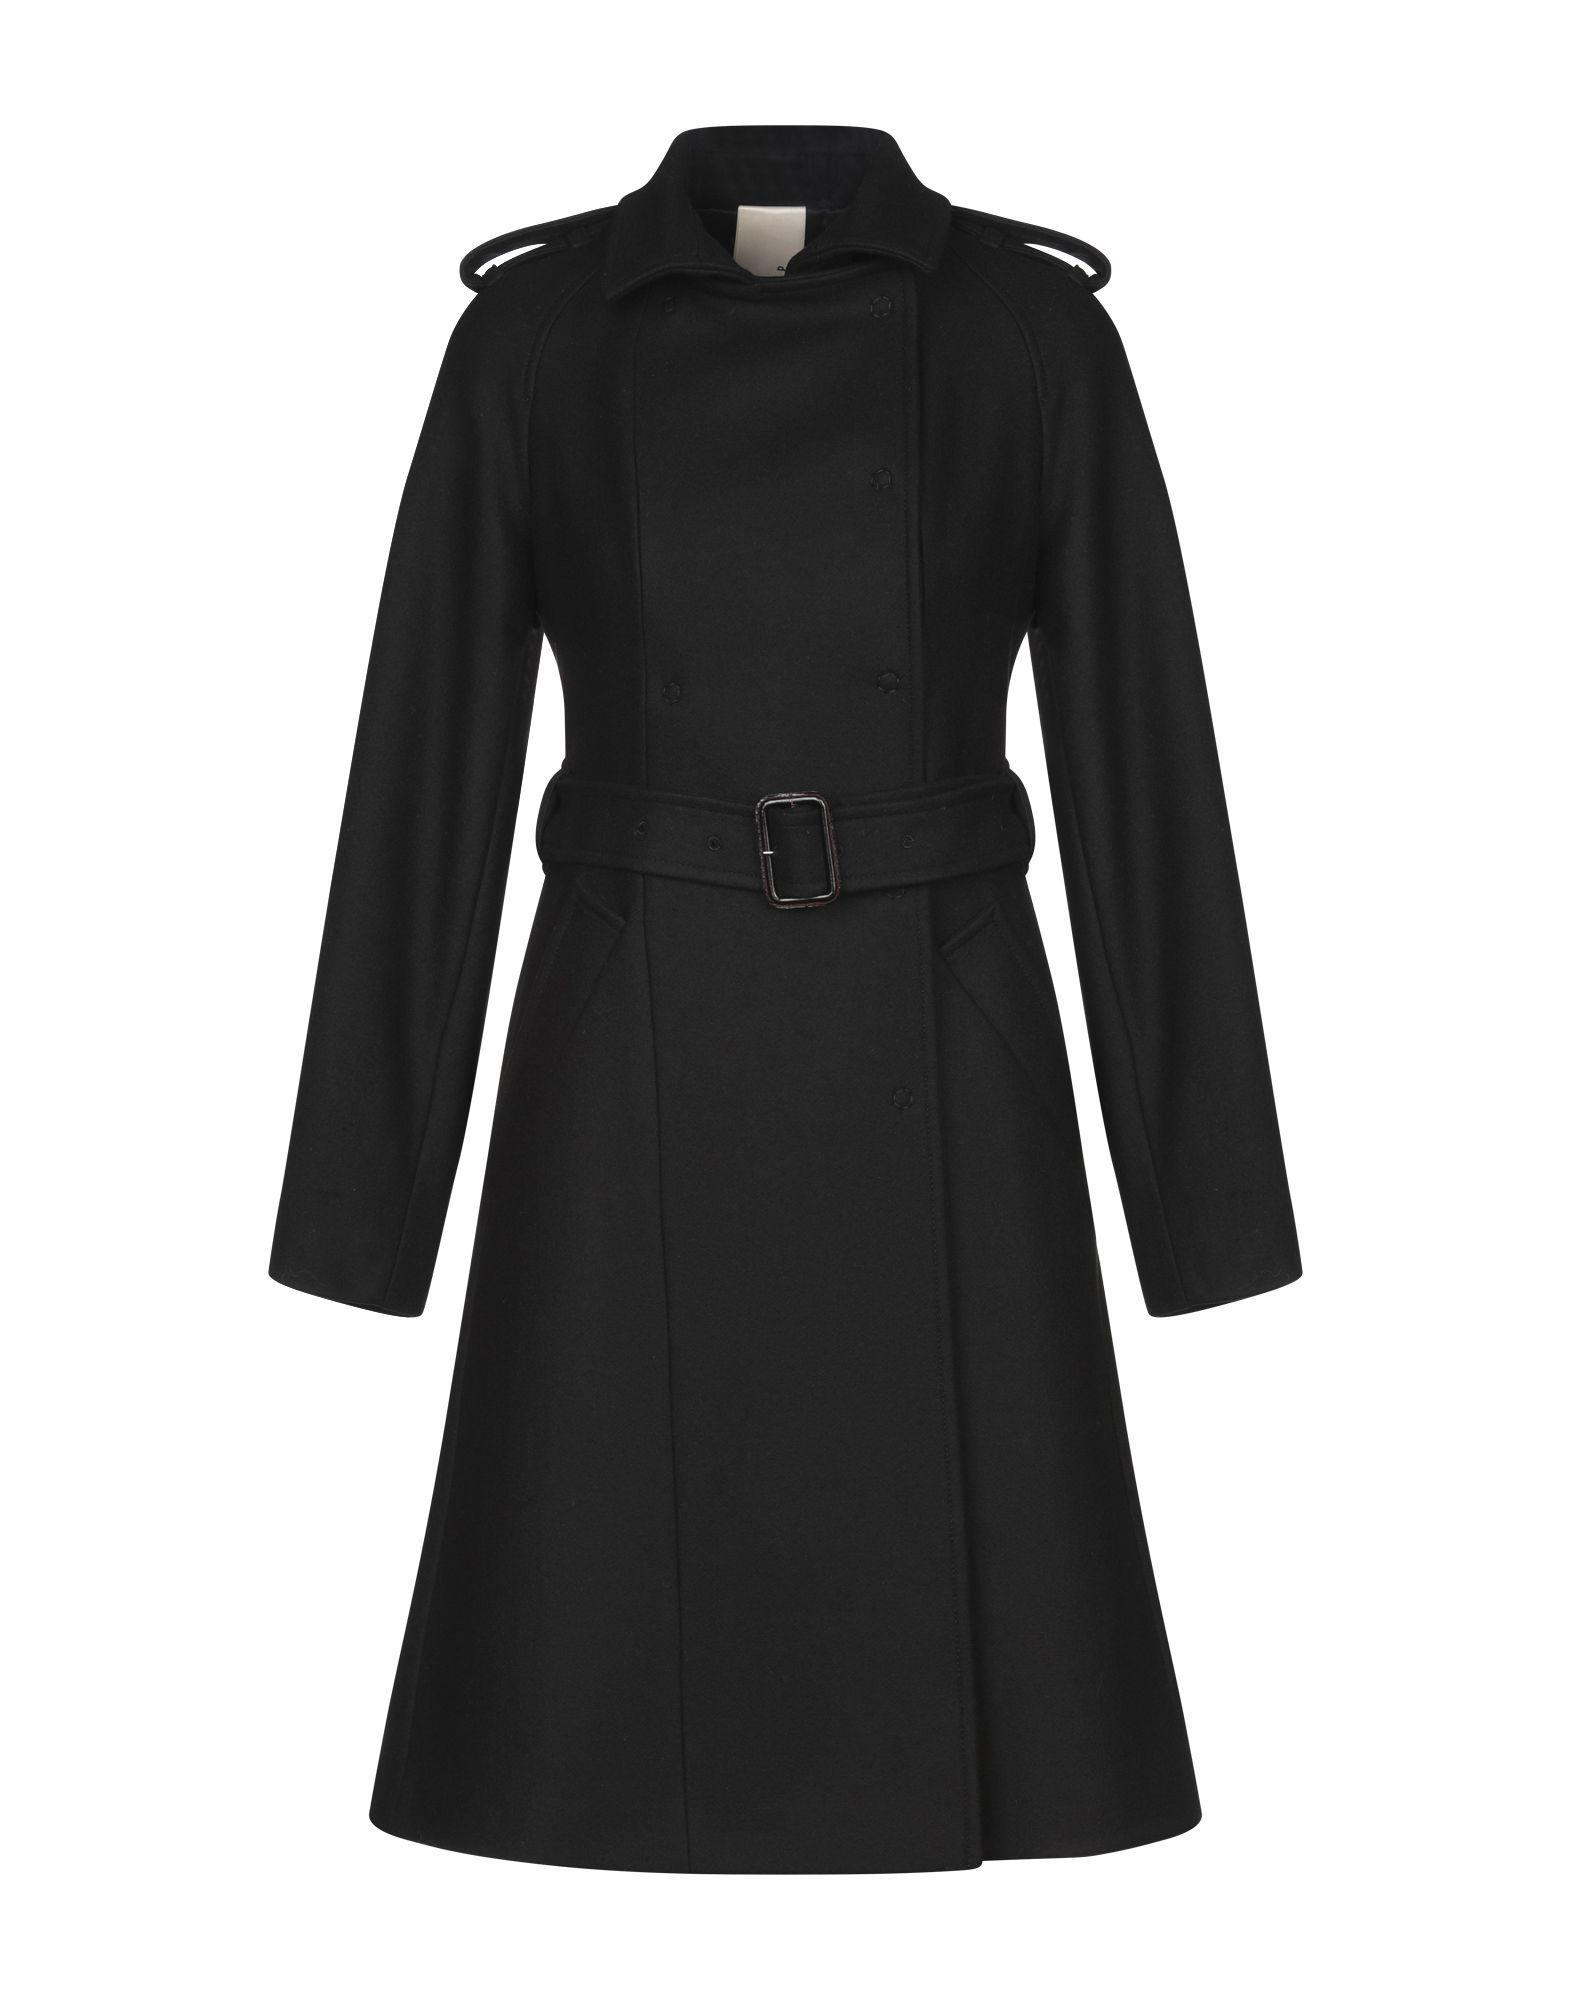 Annie P Synthetic Coat in Black - Lyst